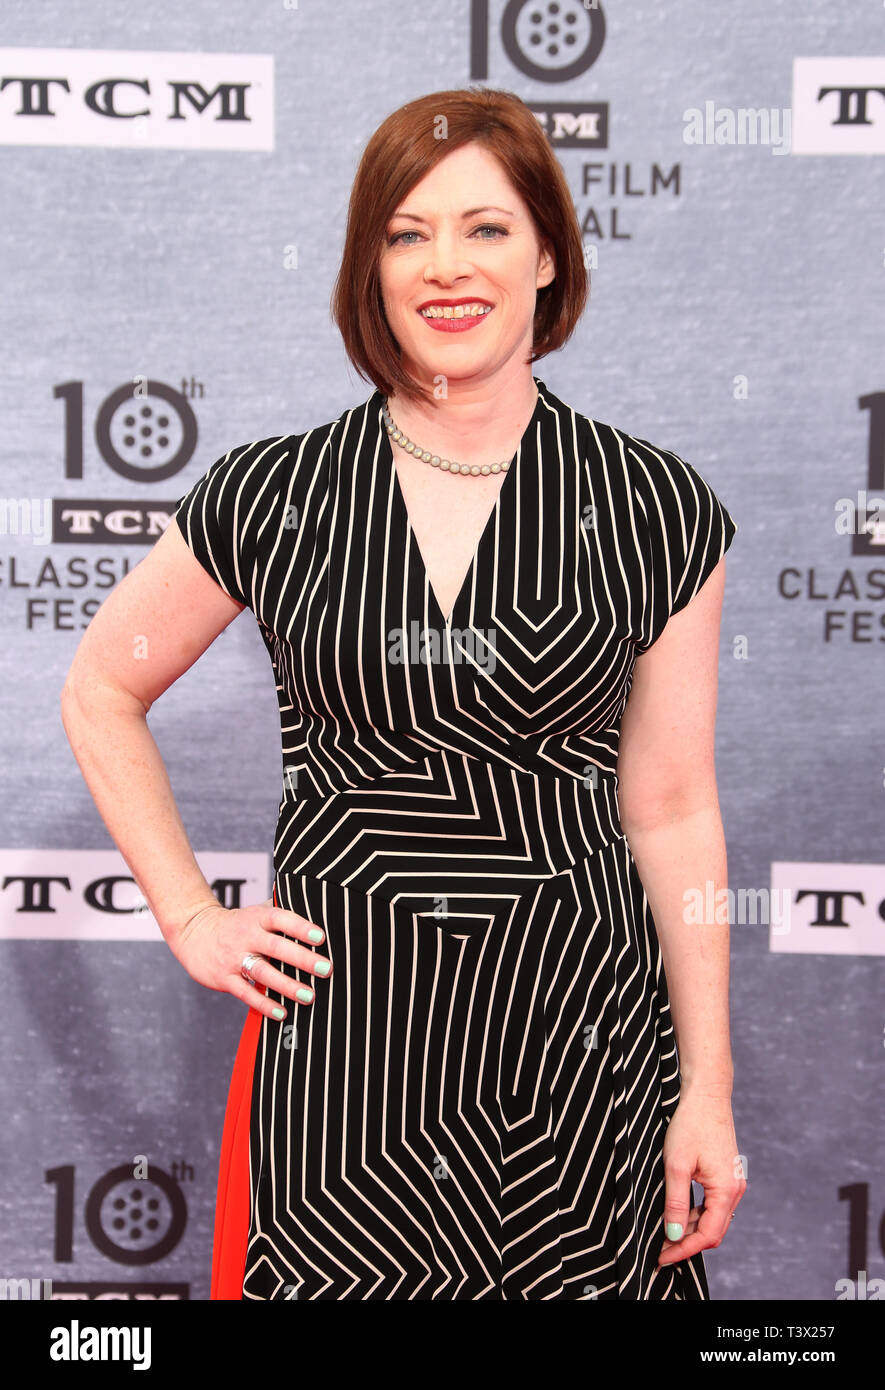 Los Angeles, USA. 11th Apr 2019. Genevieve McGillicuddy, arrive to 2019 TCM Classic Film Festival Opening Night Gala And 30th Anniversary Screening Of 'When Harry Met Sally', TCL Chinese Theatre, Los Angeles, USA on April 11, 2019 Credit: Faye Sadou/MediaPunch Credit: MediaPunch Inc/Alamy Live News Stock Photo